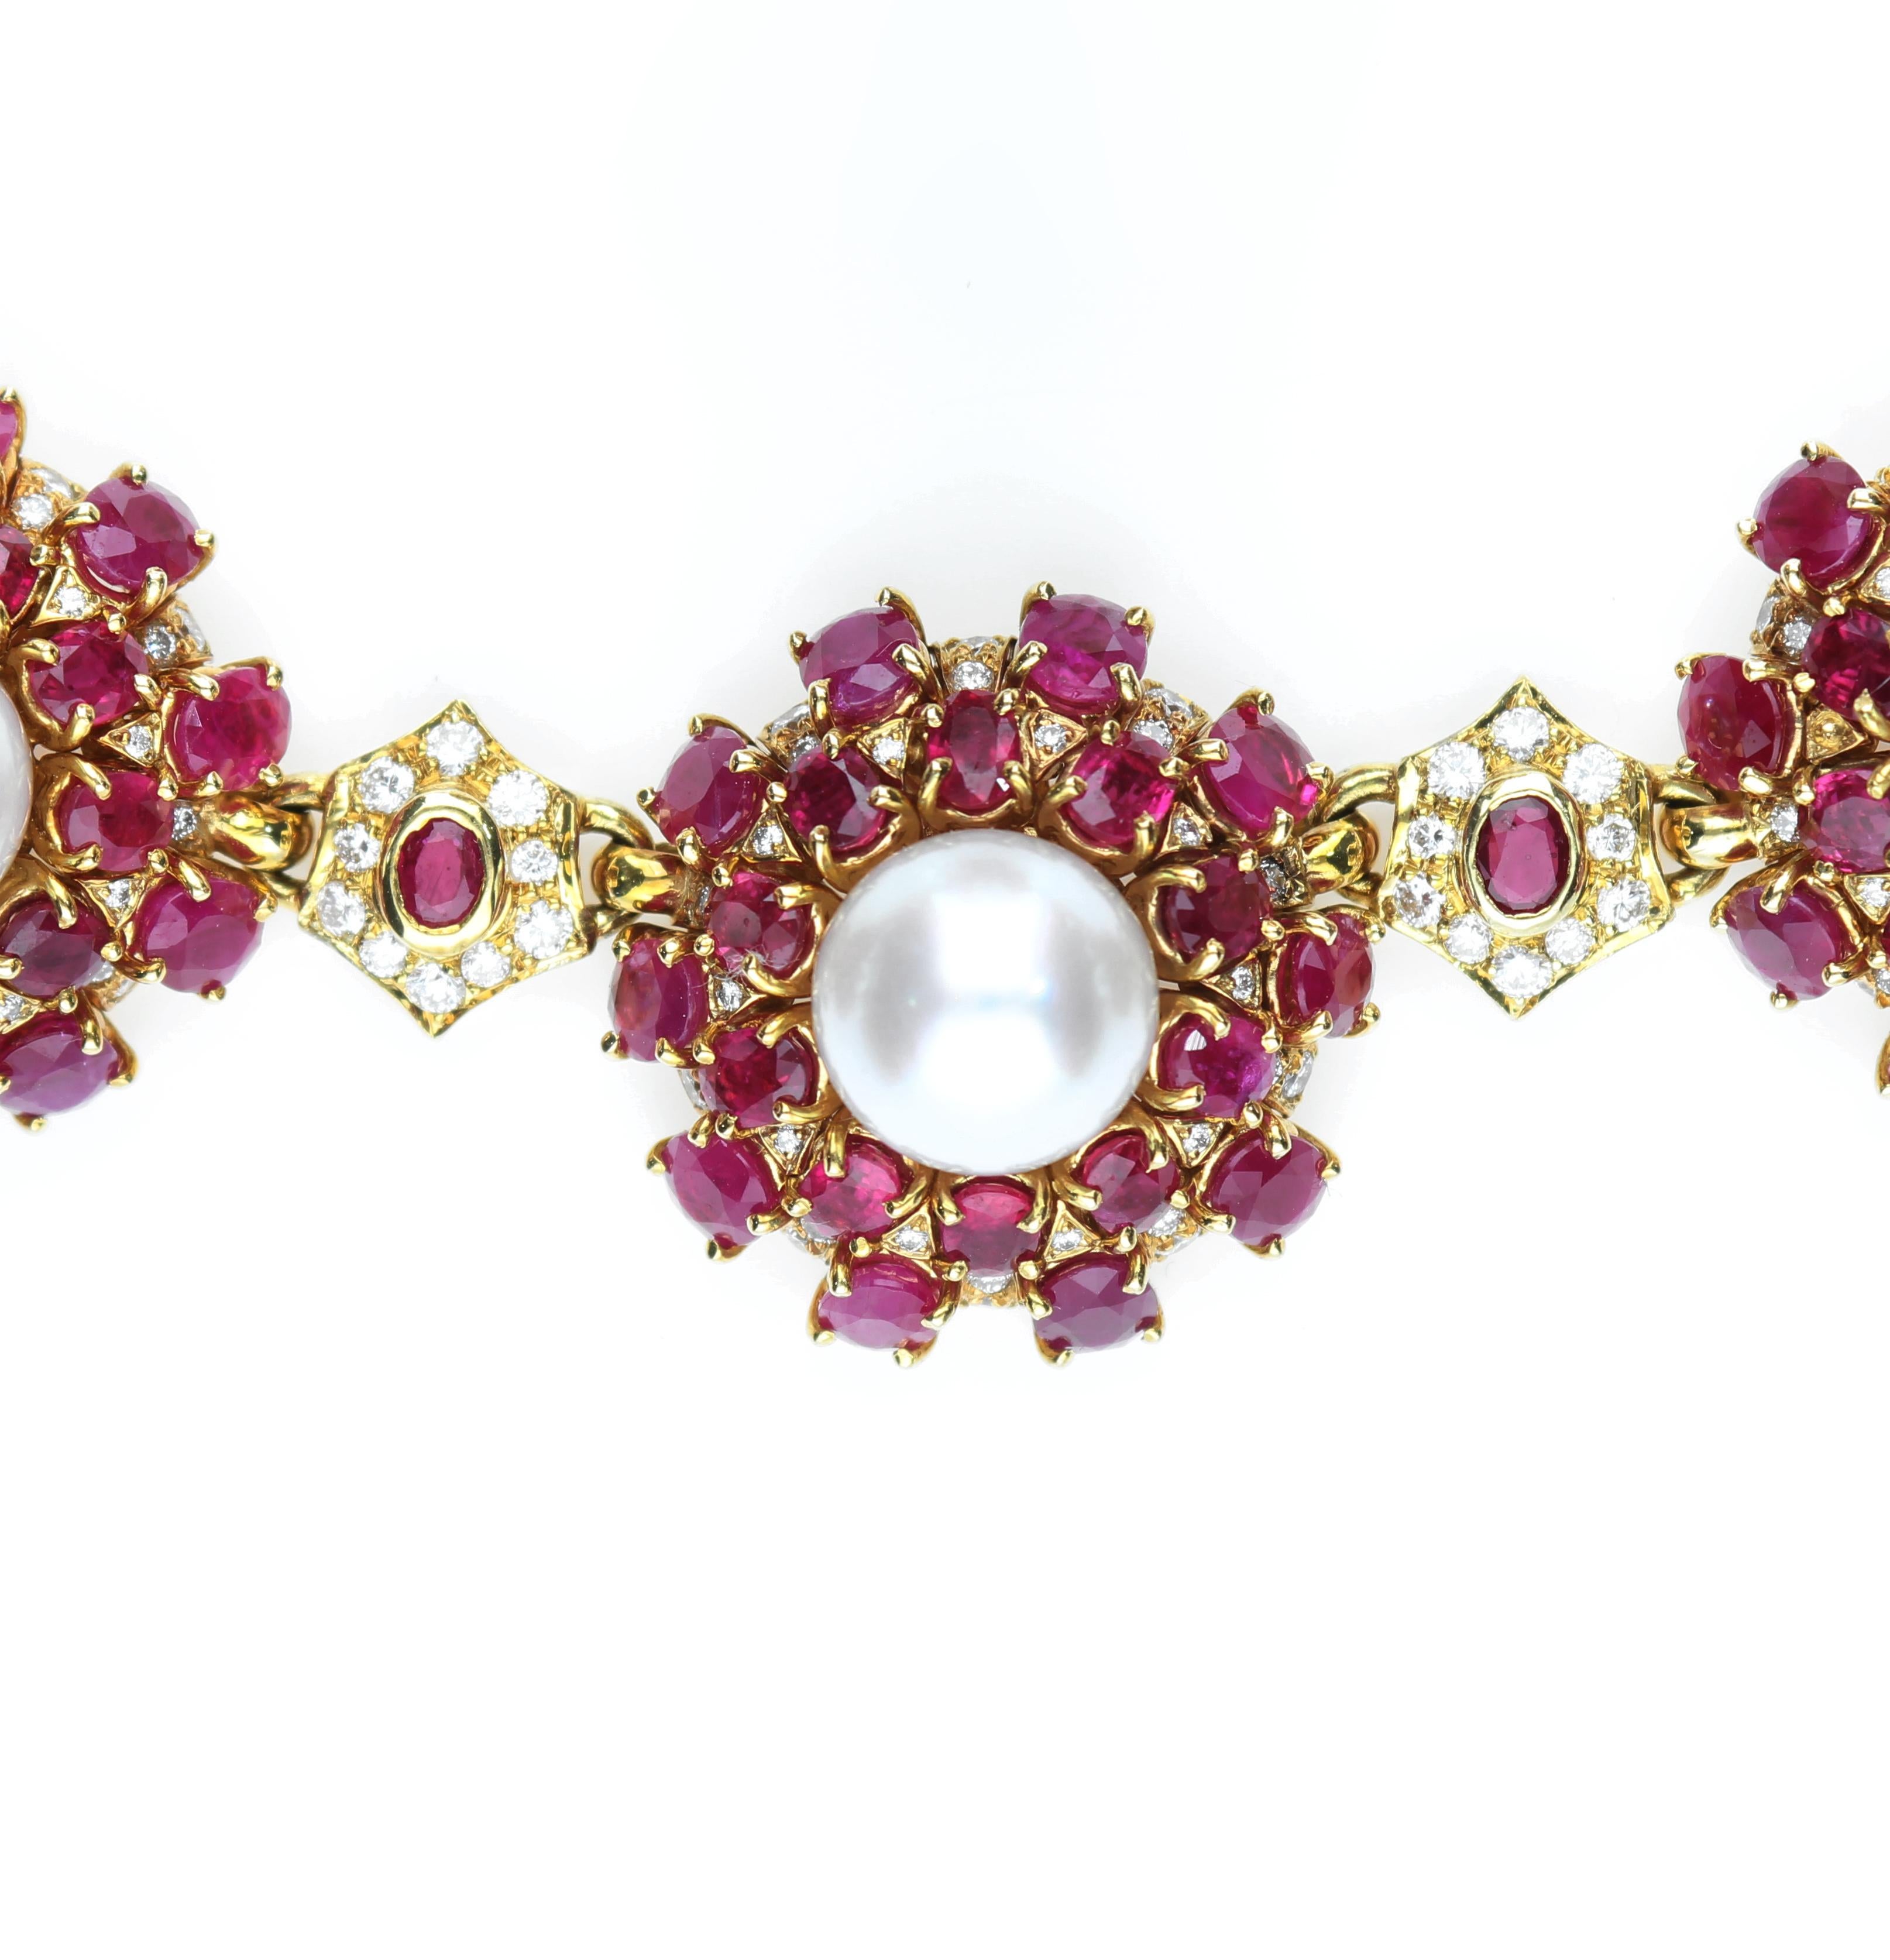 Parure with Rubies, Pearls and Diamonds in 18 Karat Yellow Gold 3